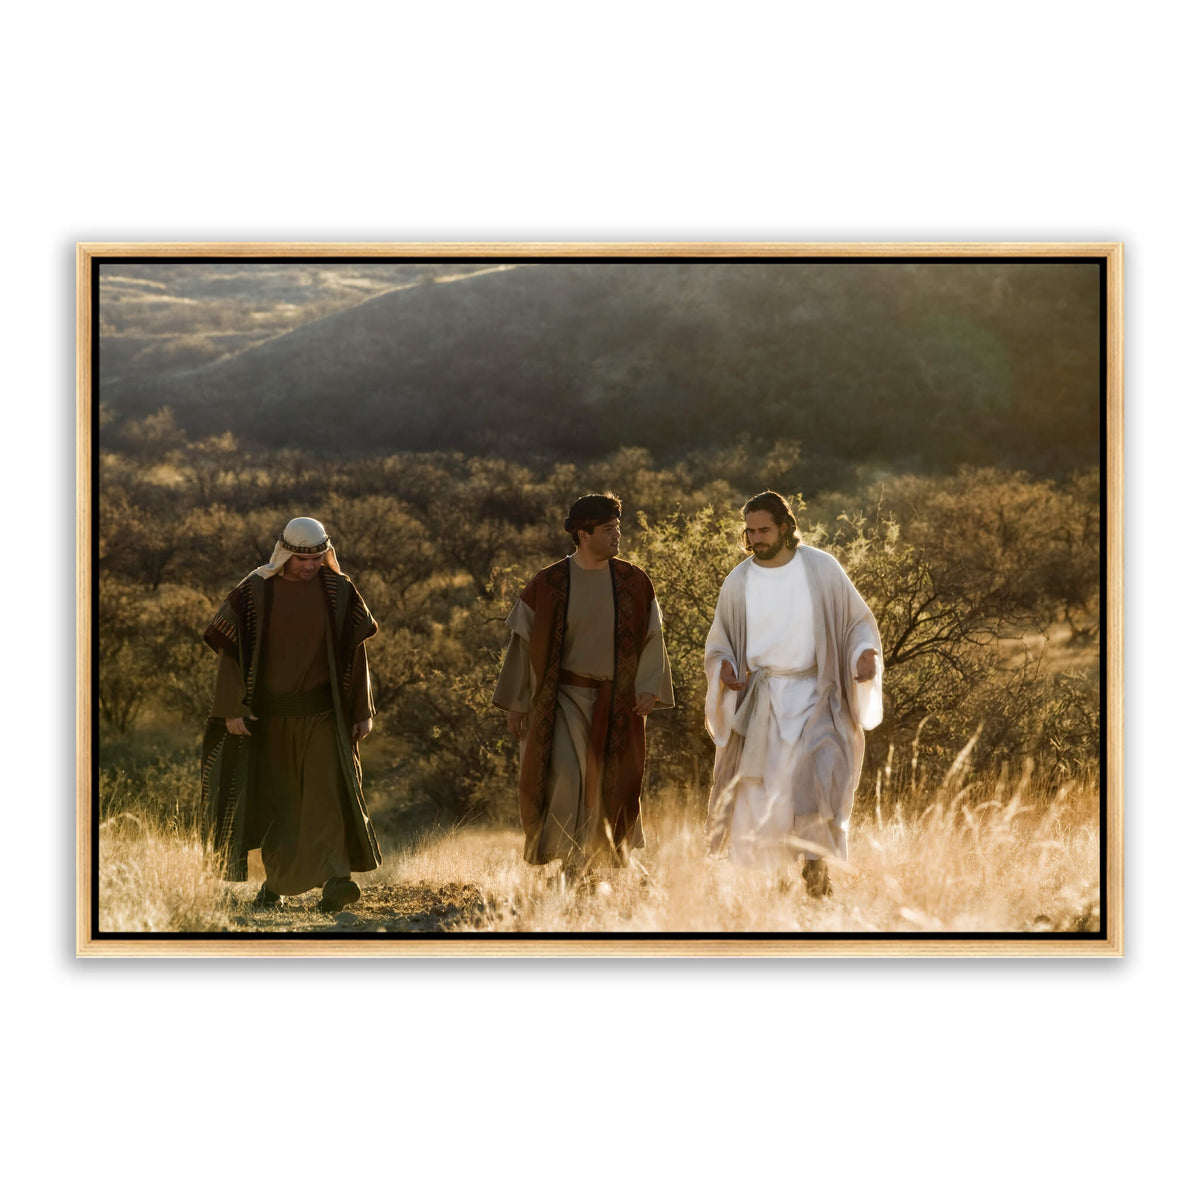 Road To Emmaus – ReflectionsofChrist